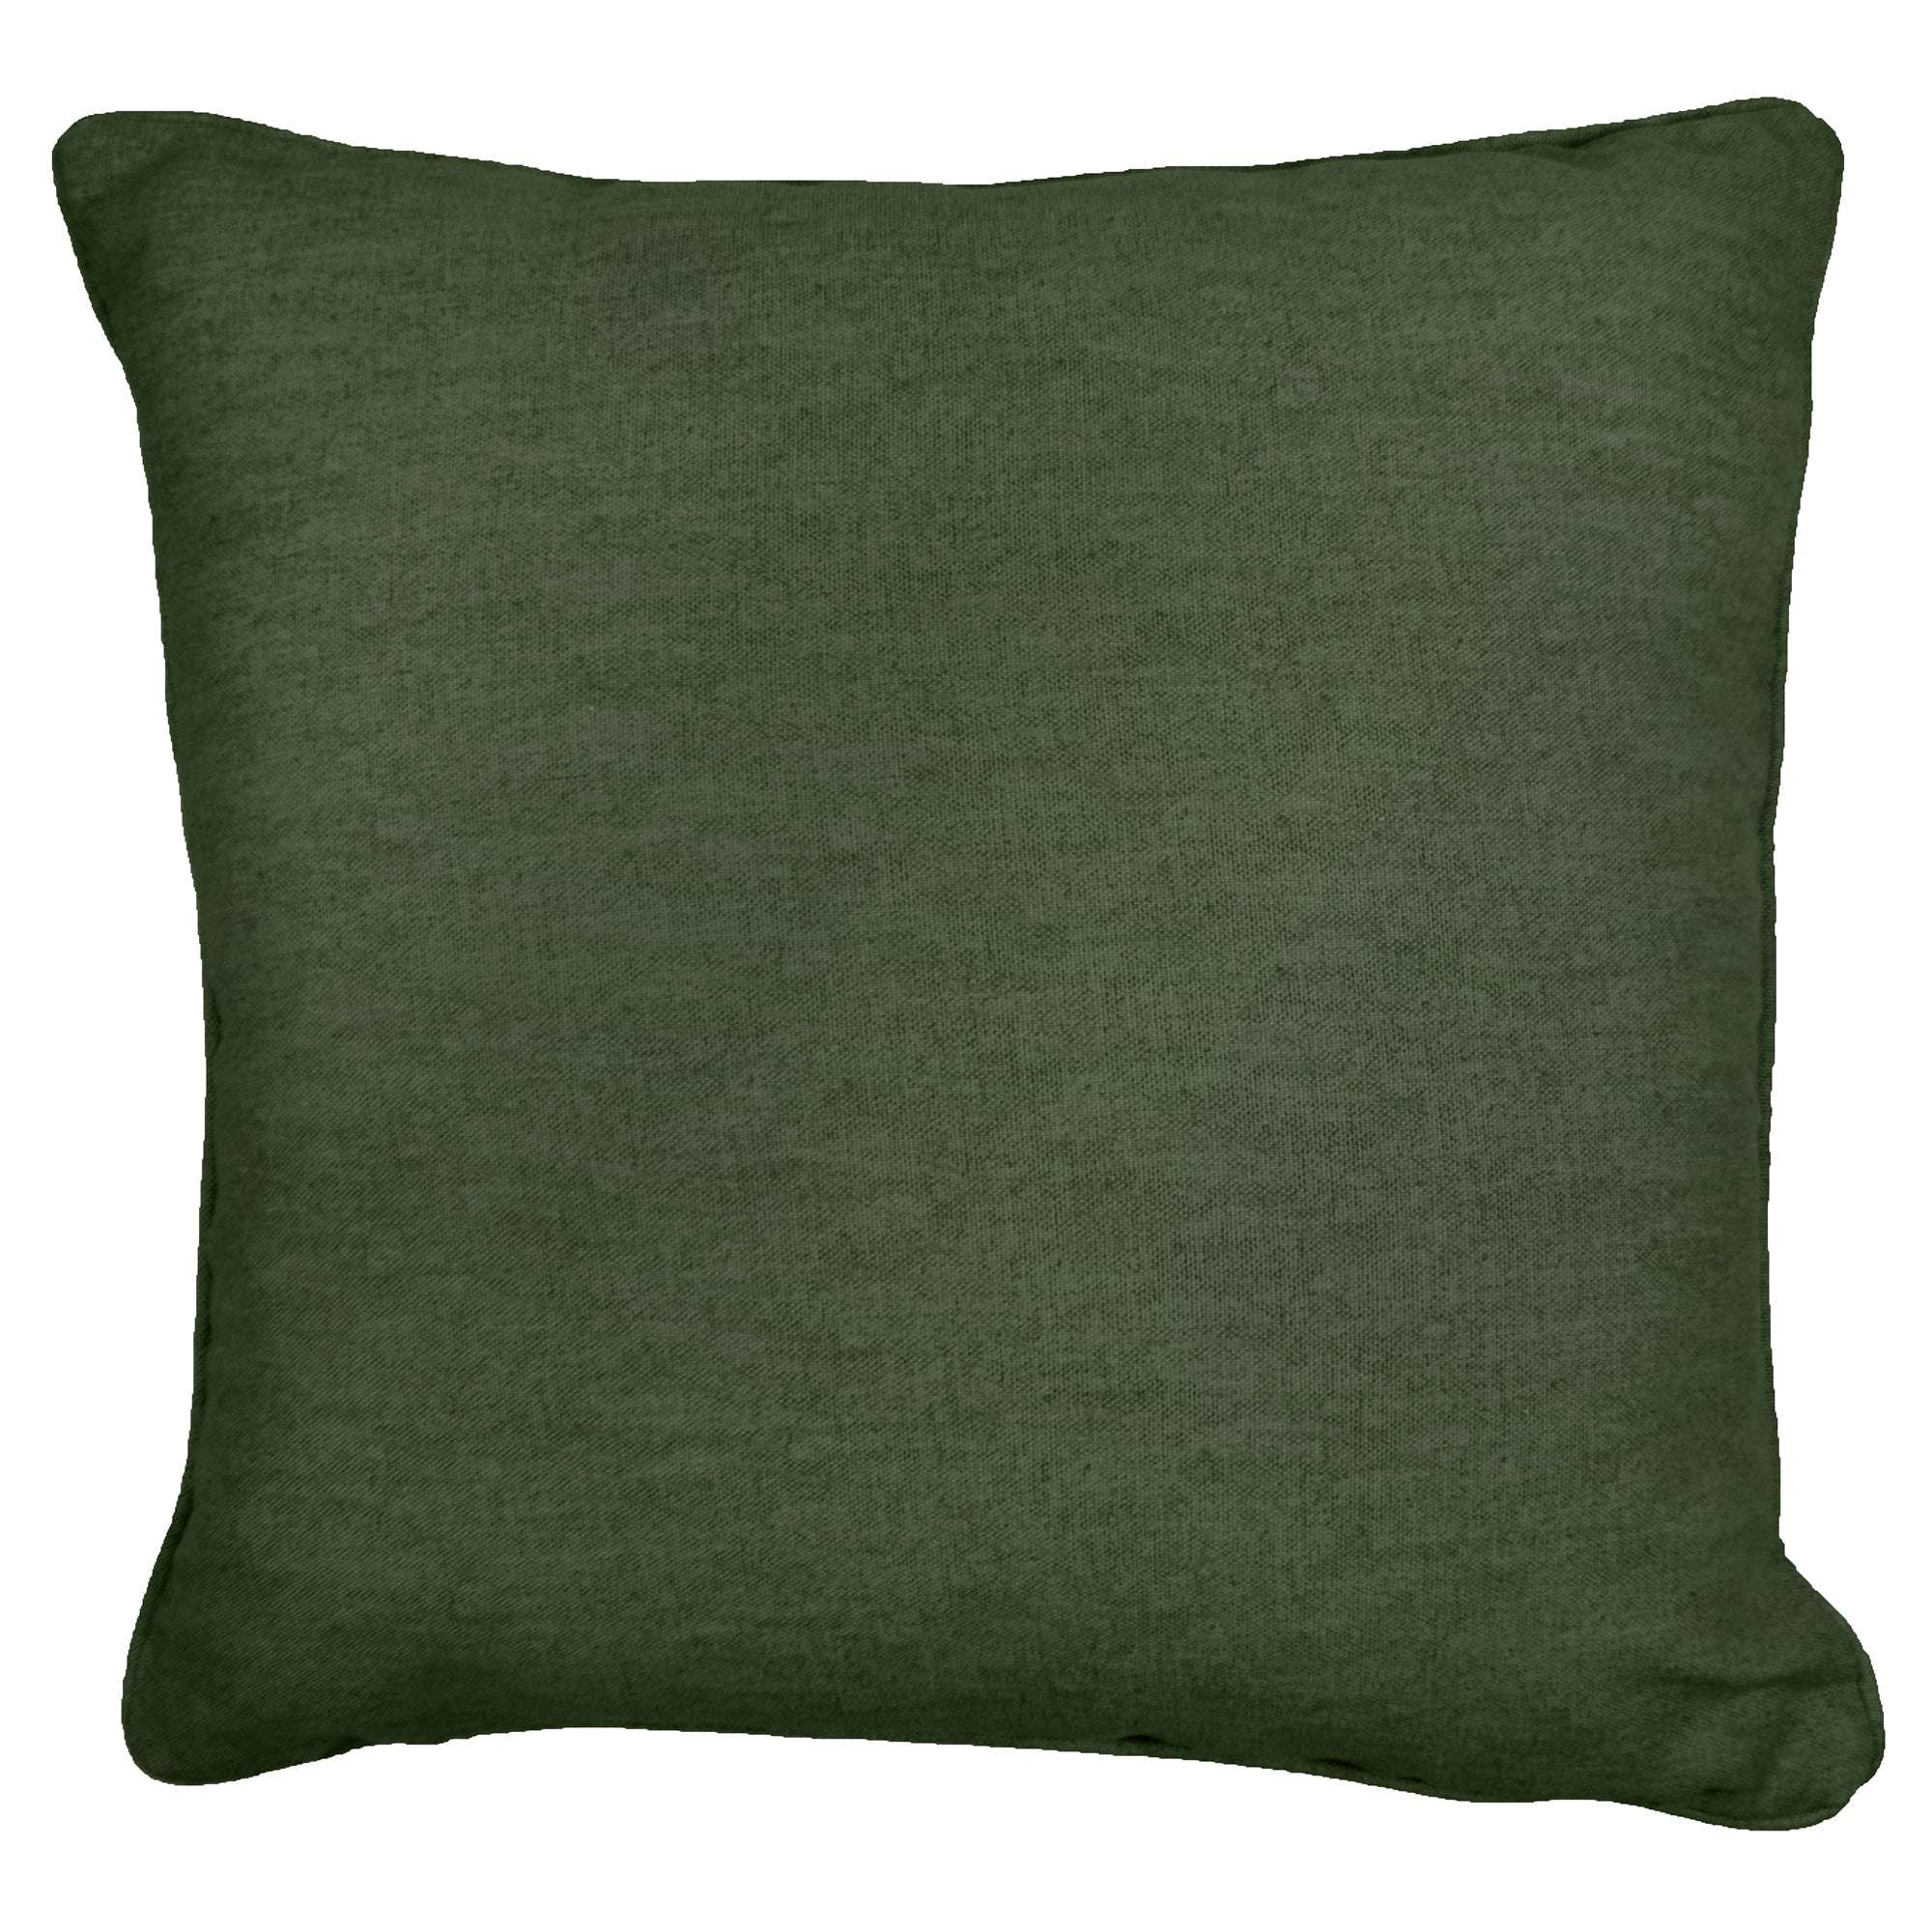 Sorbonne - 100% Cotton Filled Cushion in Bottle Green - by Fusion